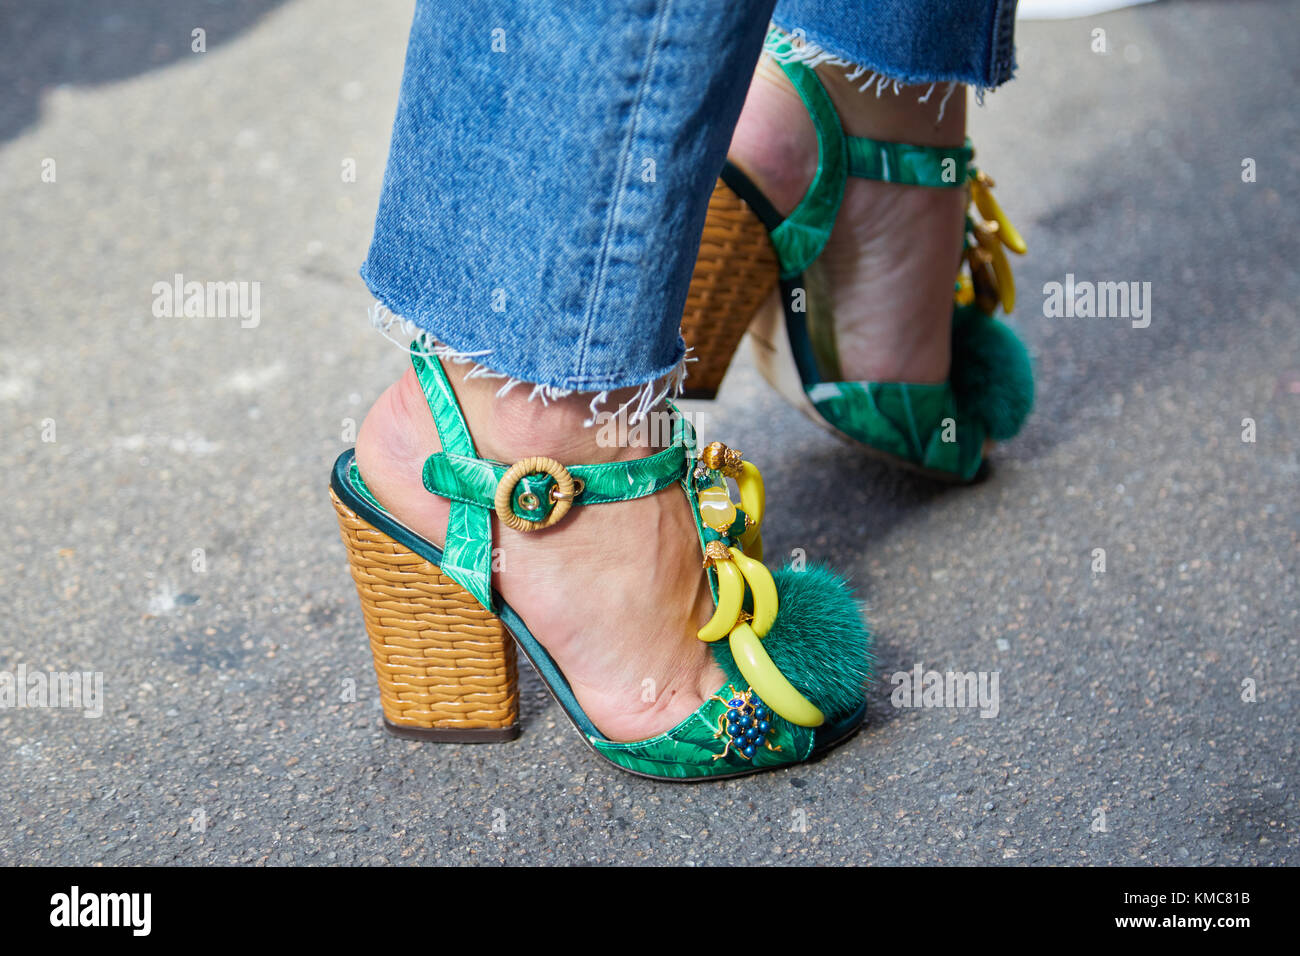 MILAN - SEPTEMBER 23: Woman with green high heel shoes with yellow bananas decorations and torn blue jeans before Ermanno Scervino fashion show, Milan Stock Photo